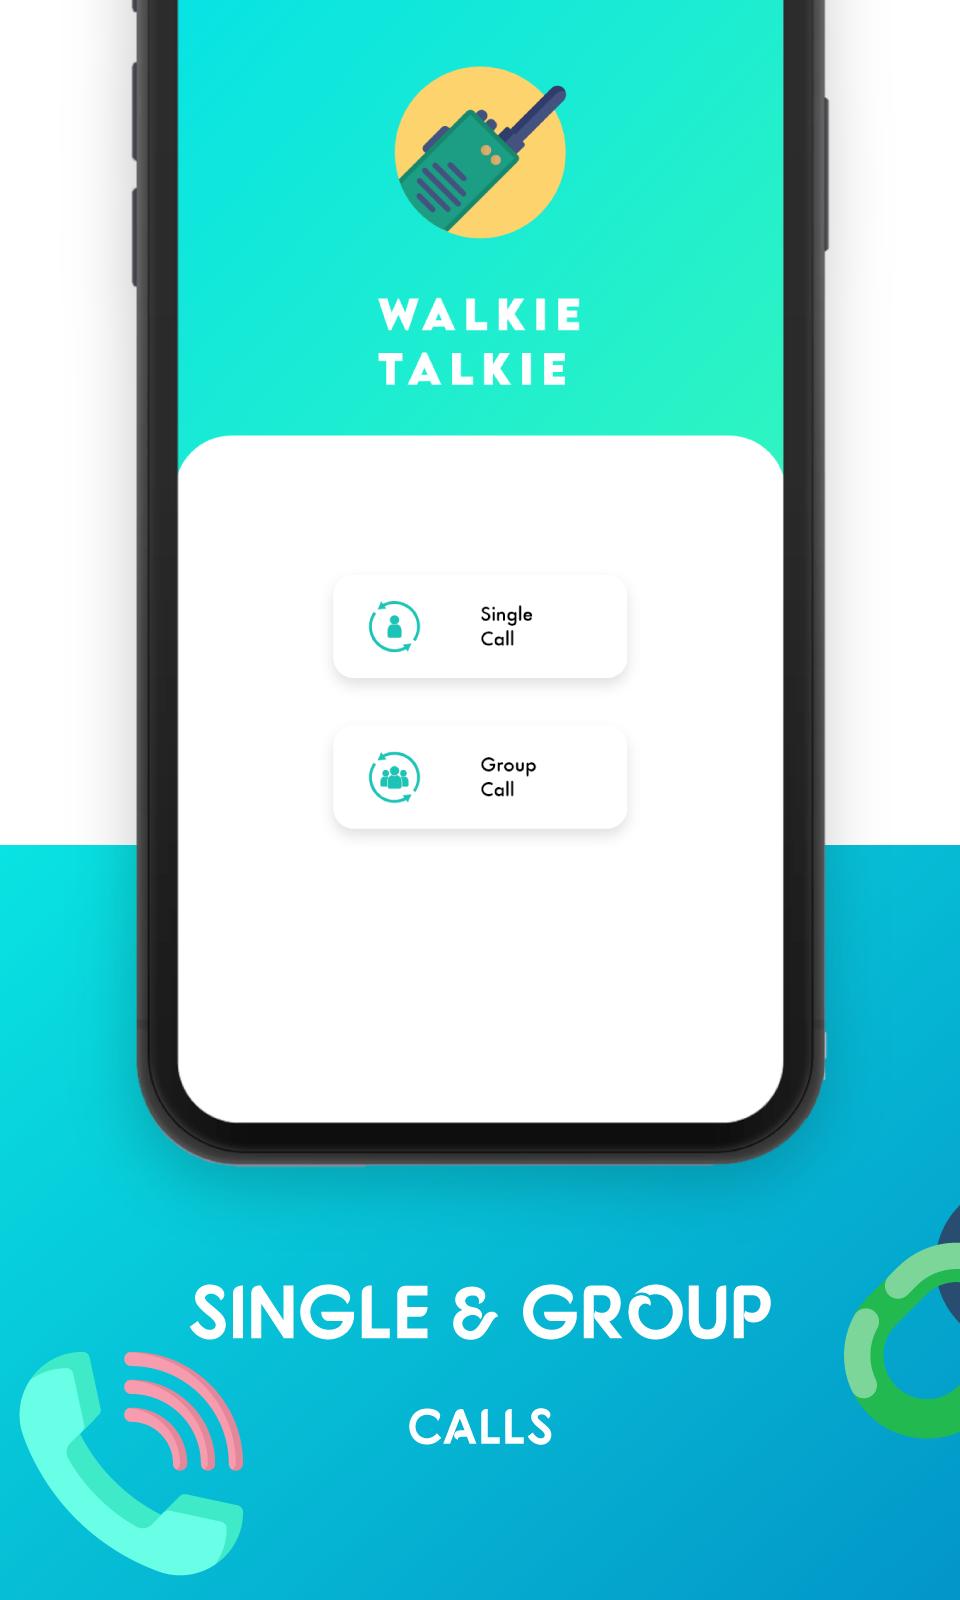 Free Call Without Internet With PTT Walkie Talkie for Android - APK Download